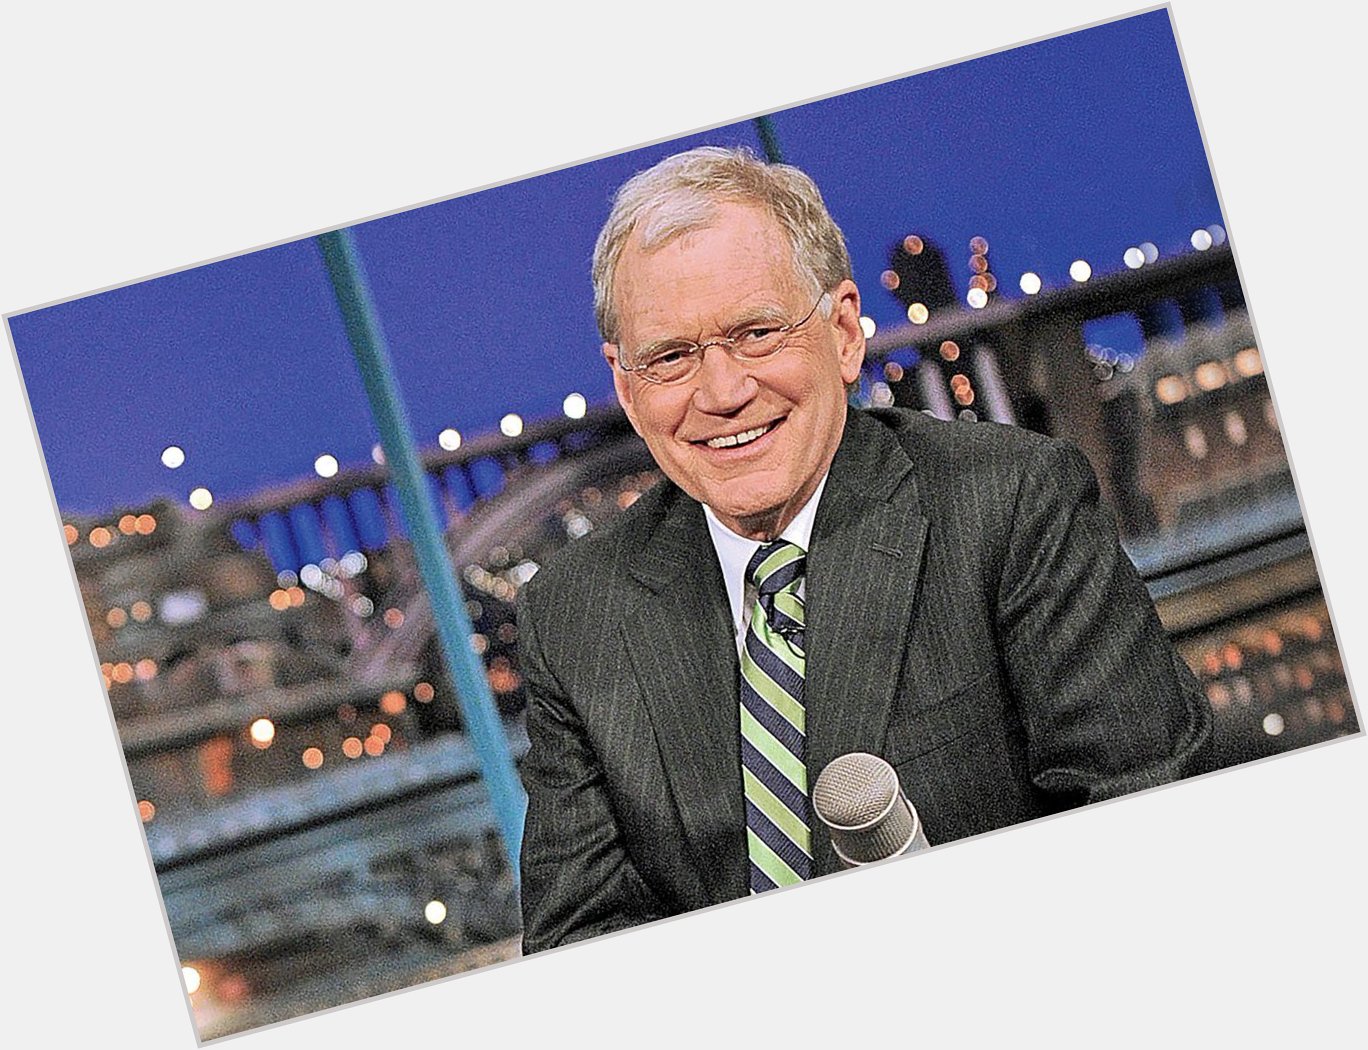 Born and raised in Indianapolis Indiana - Happy Birthday to TV host David Letterman - he\s 70 today. 